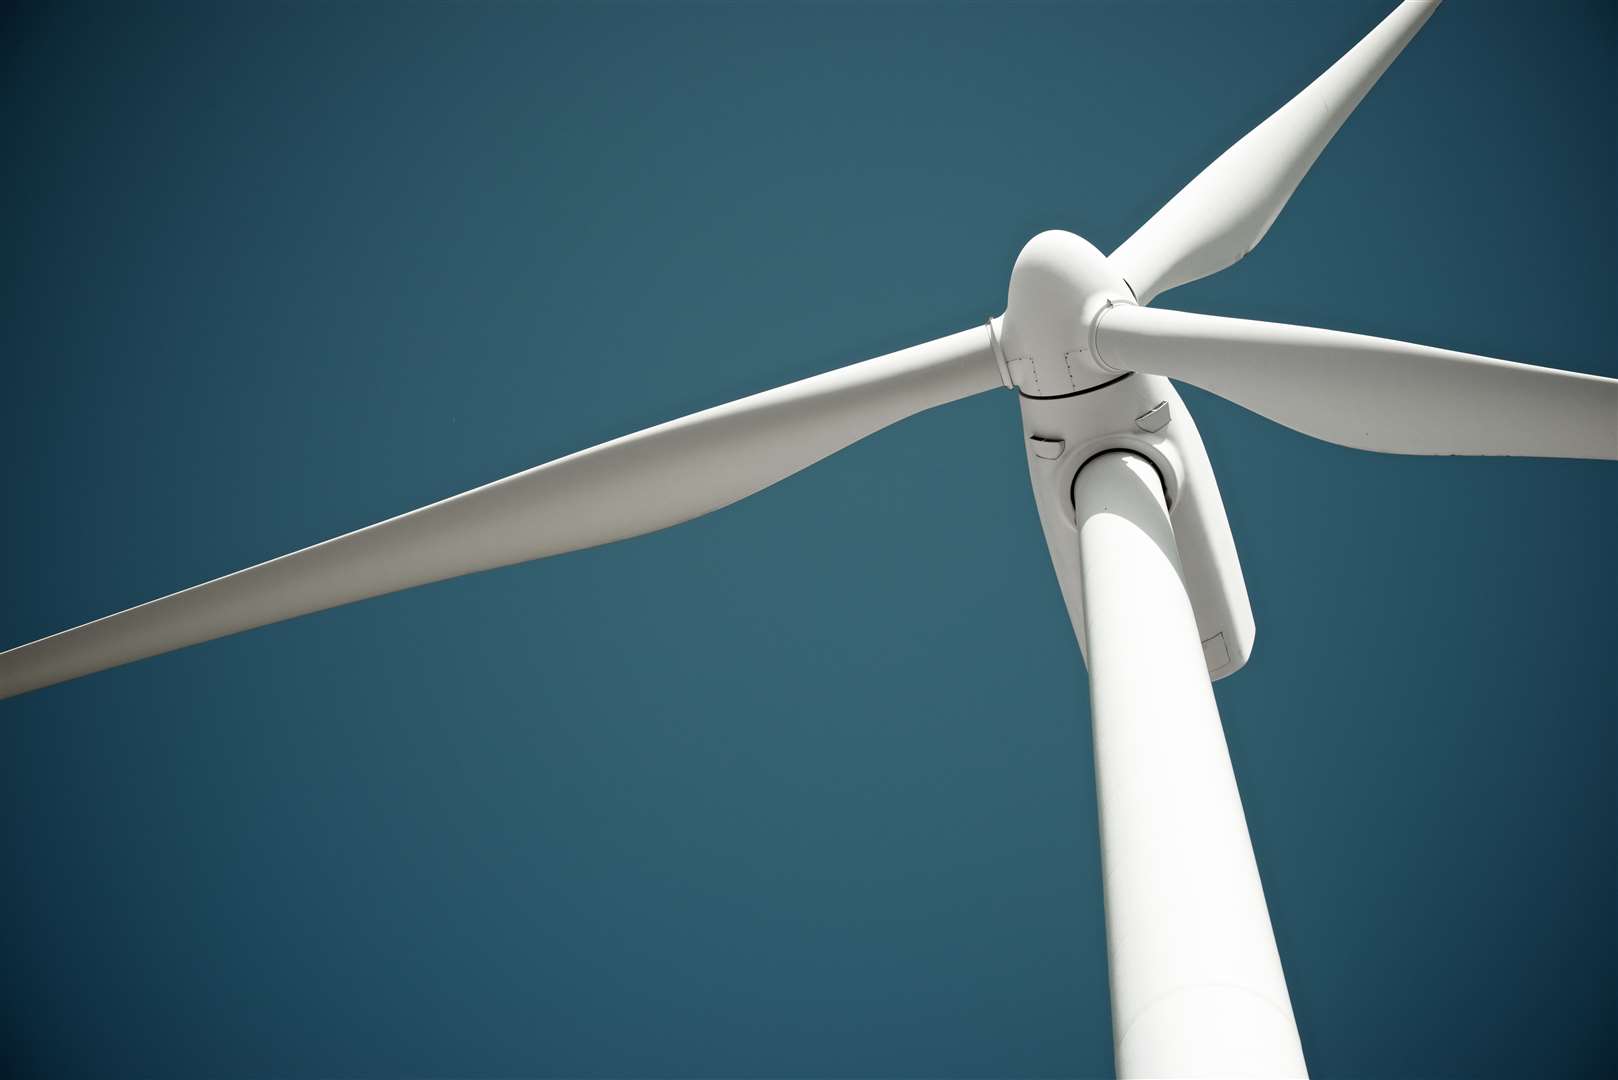 The 11 turbines in the planned Strath Oykel wind farm would be as high as 200m.